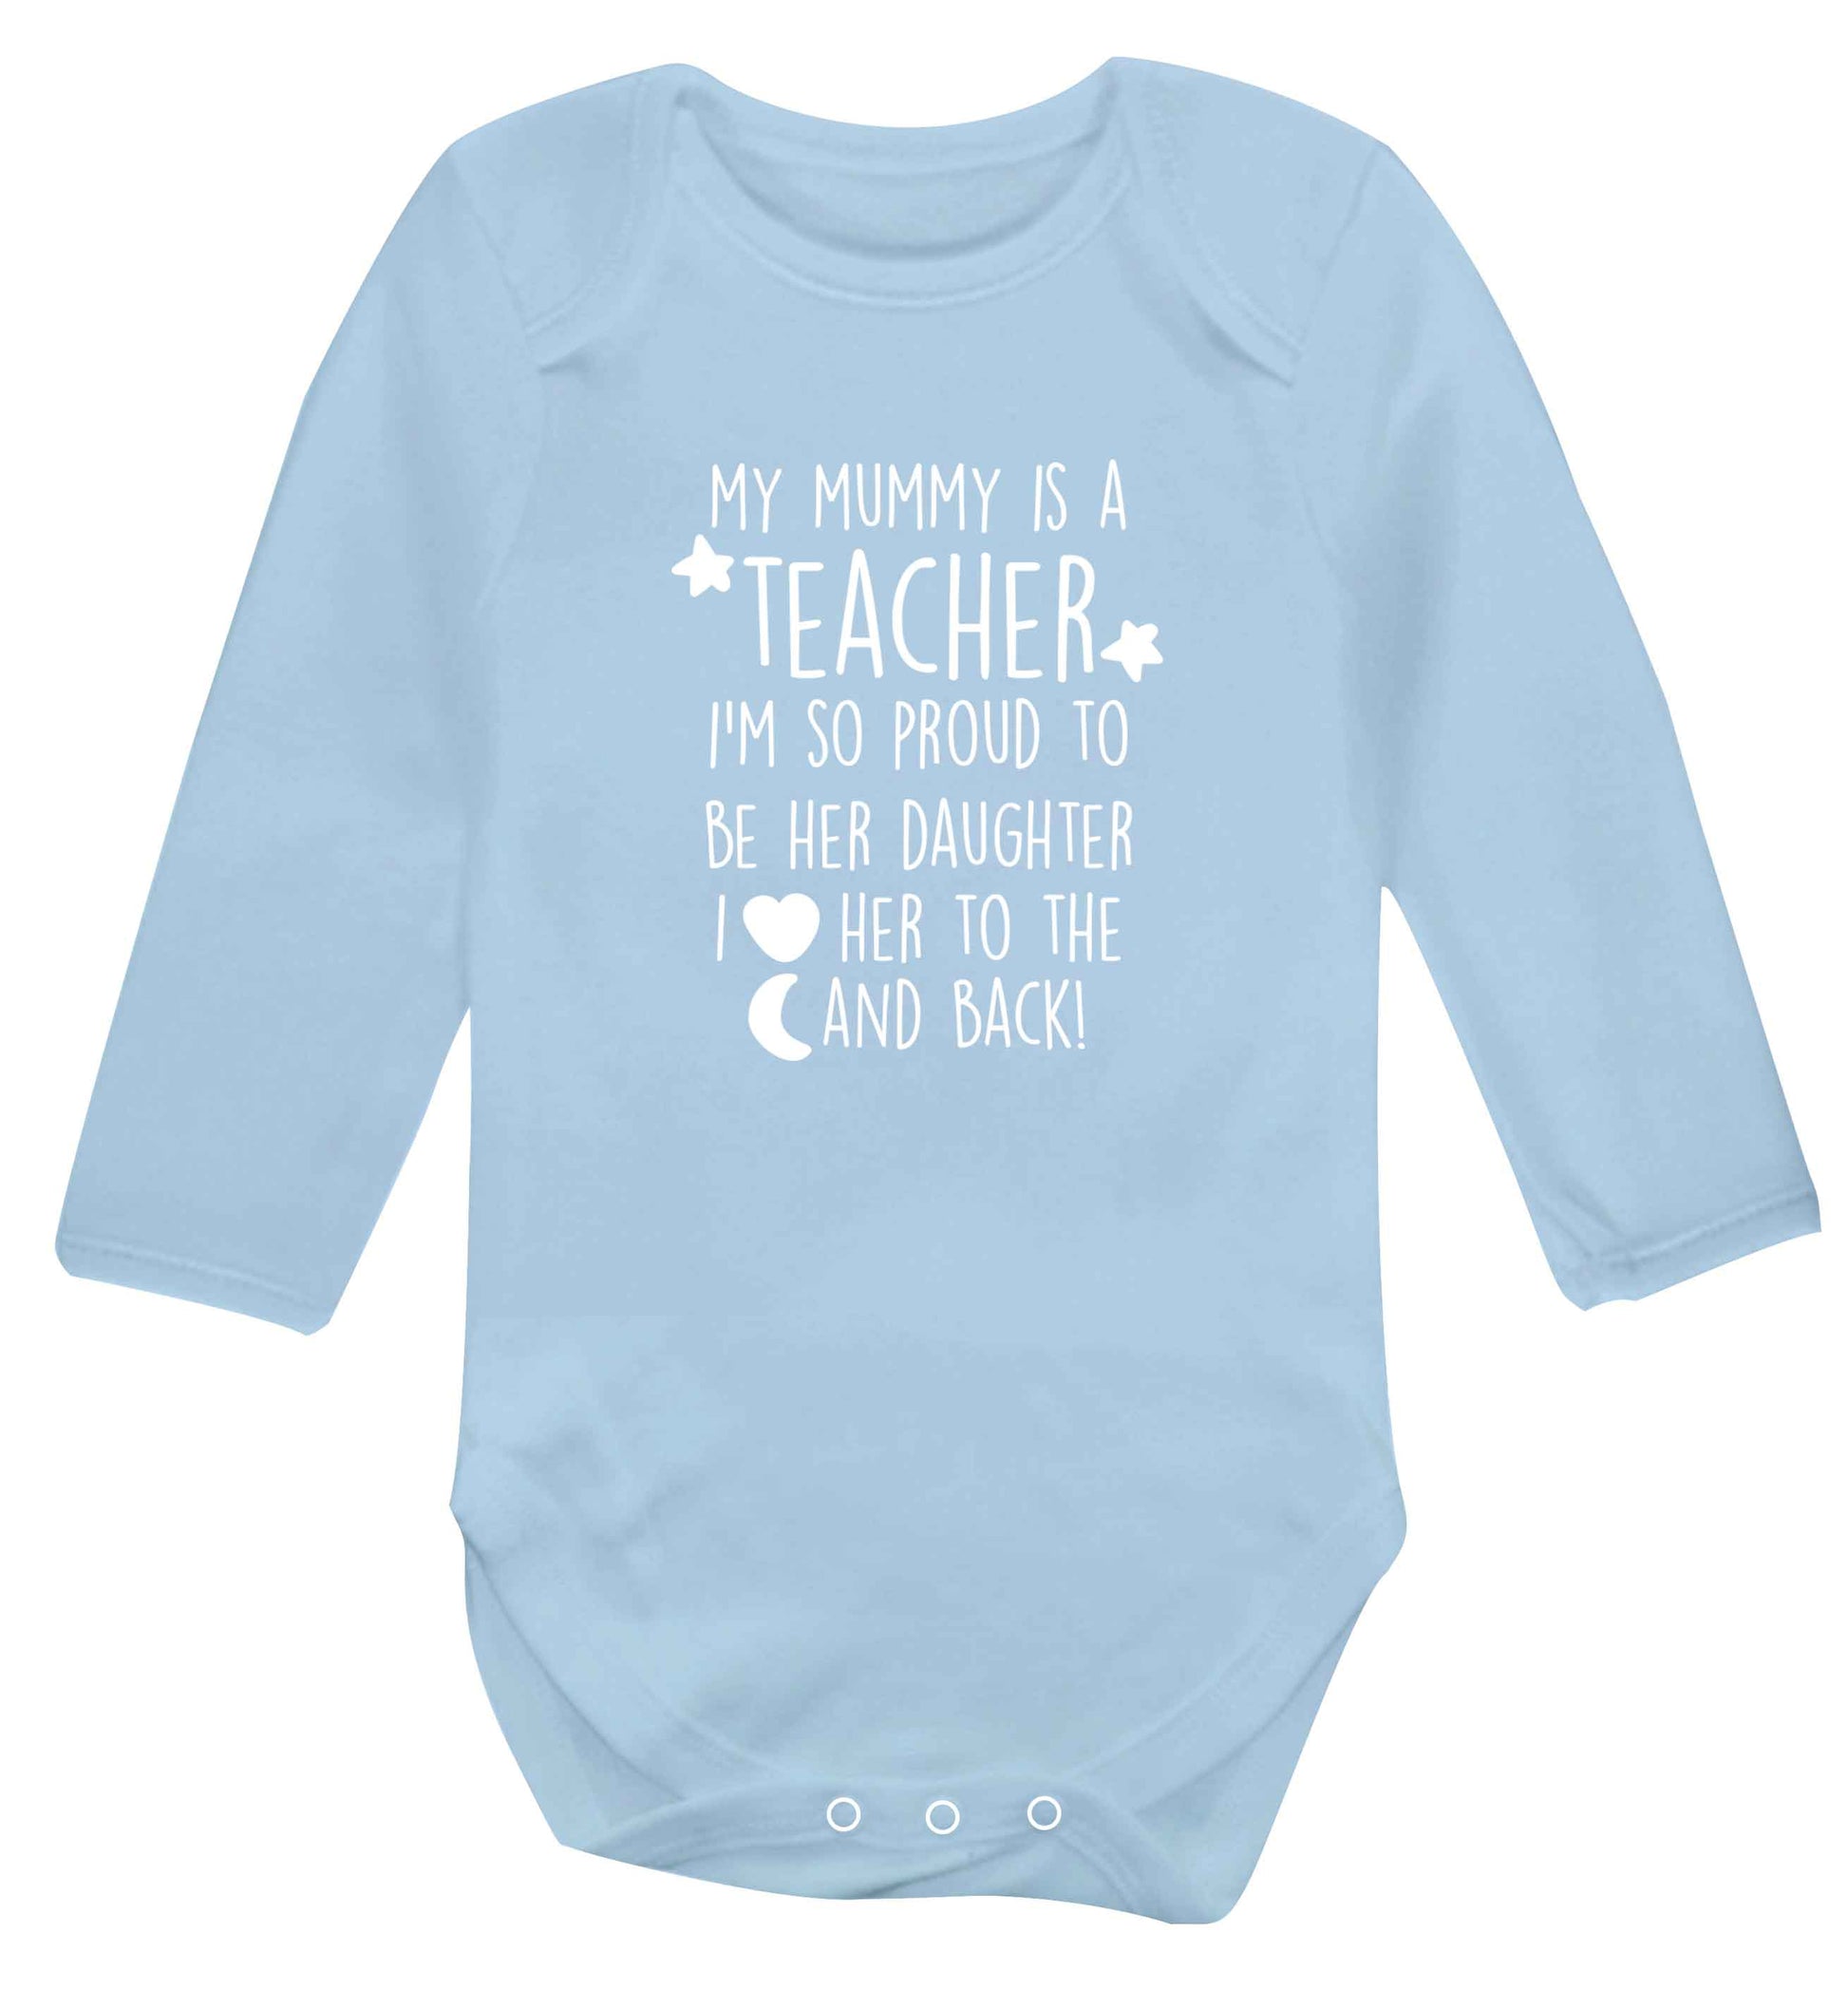 My mummy is a teacher I'm so proud to be her daughter I love her to the moon and back baby vest long sleeved pale blue 6-12 months